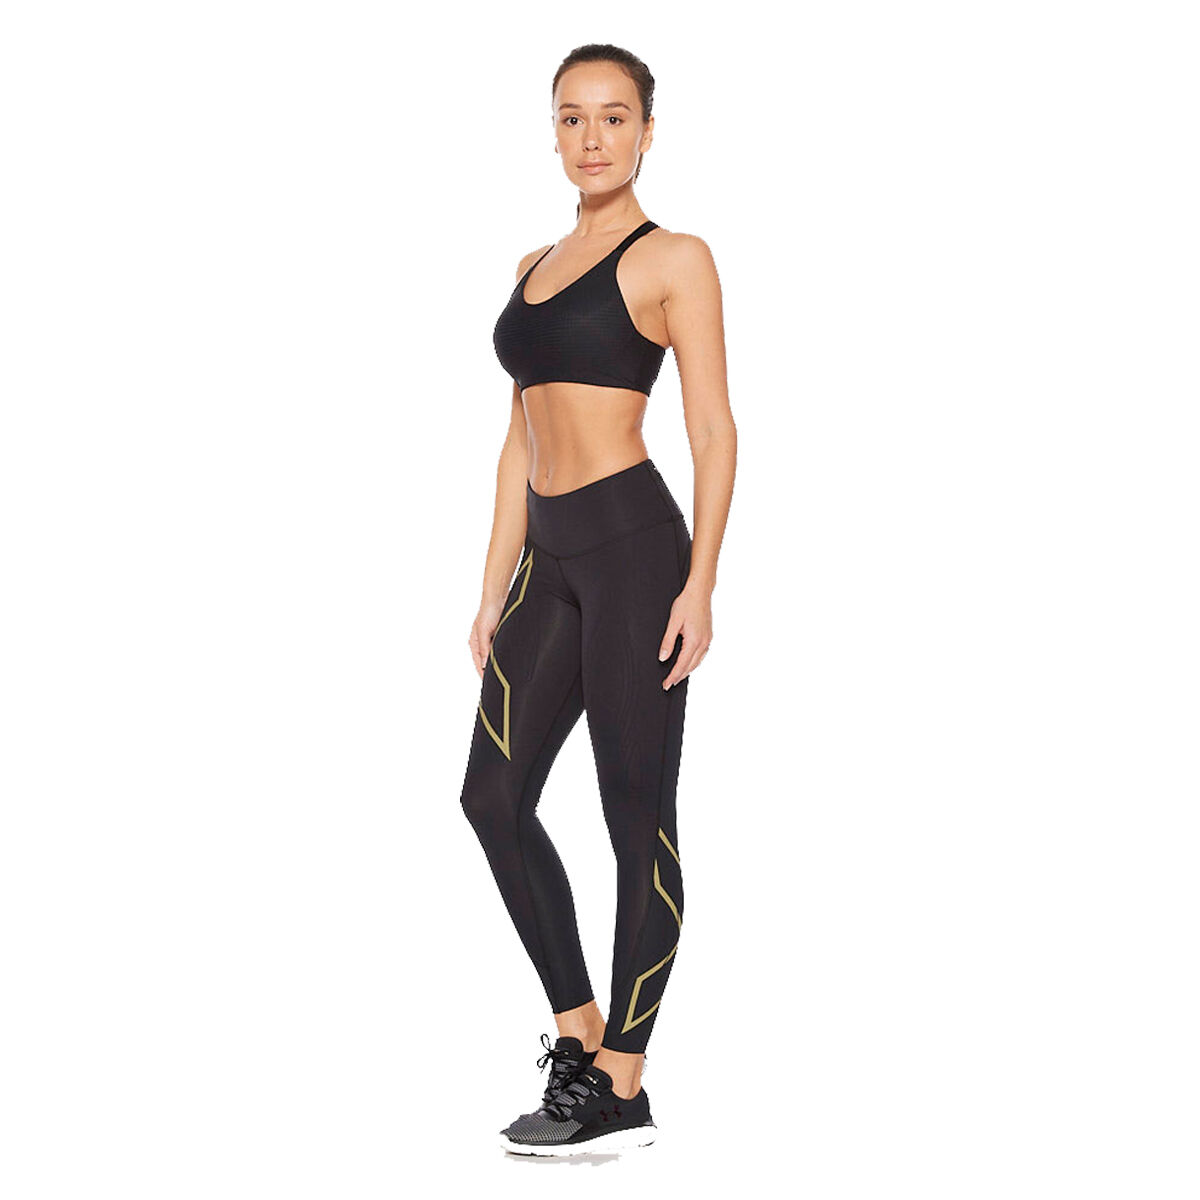 Women's Light Speed Mid-Rise Compression Tights BEET/BEET REFLECTIVE, Buy  Women's Light Speed Mid-Rise Compression Tights BEET/BEET REFLECTIVE here